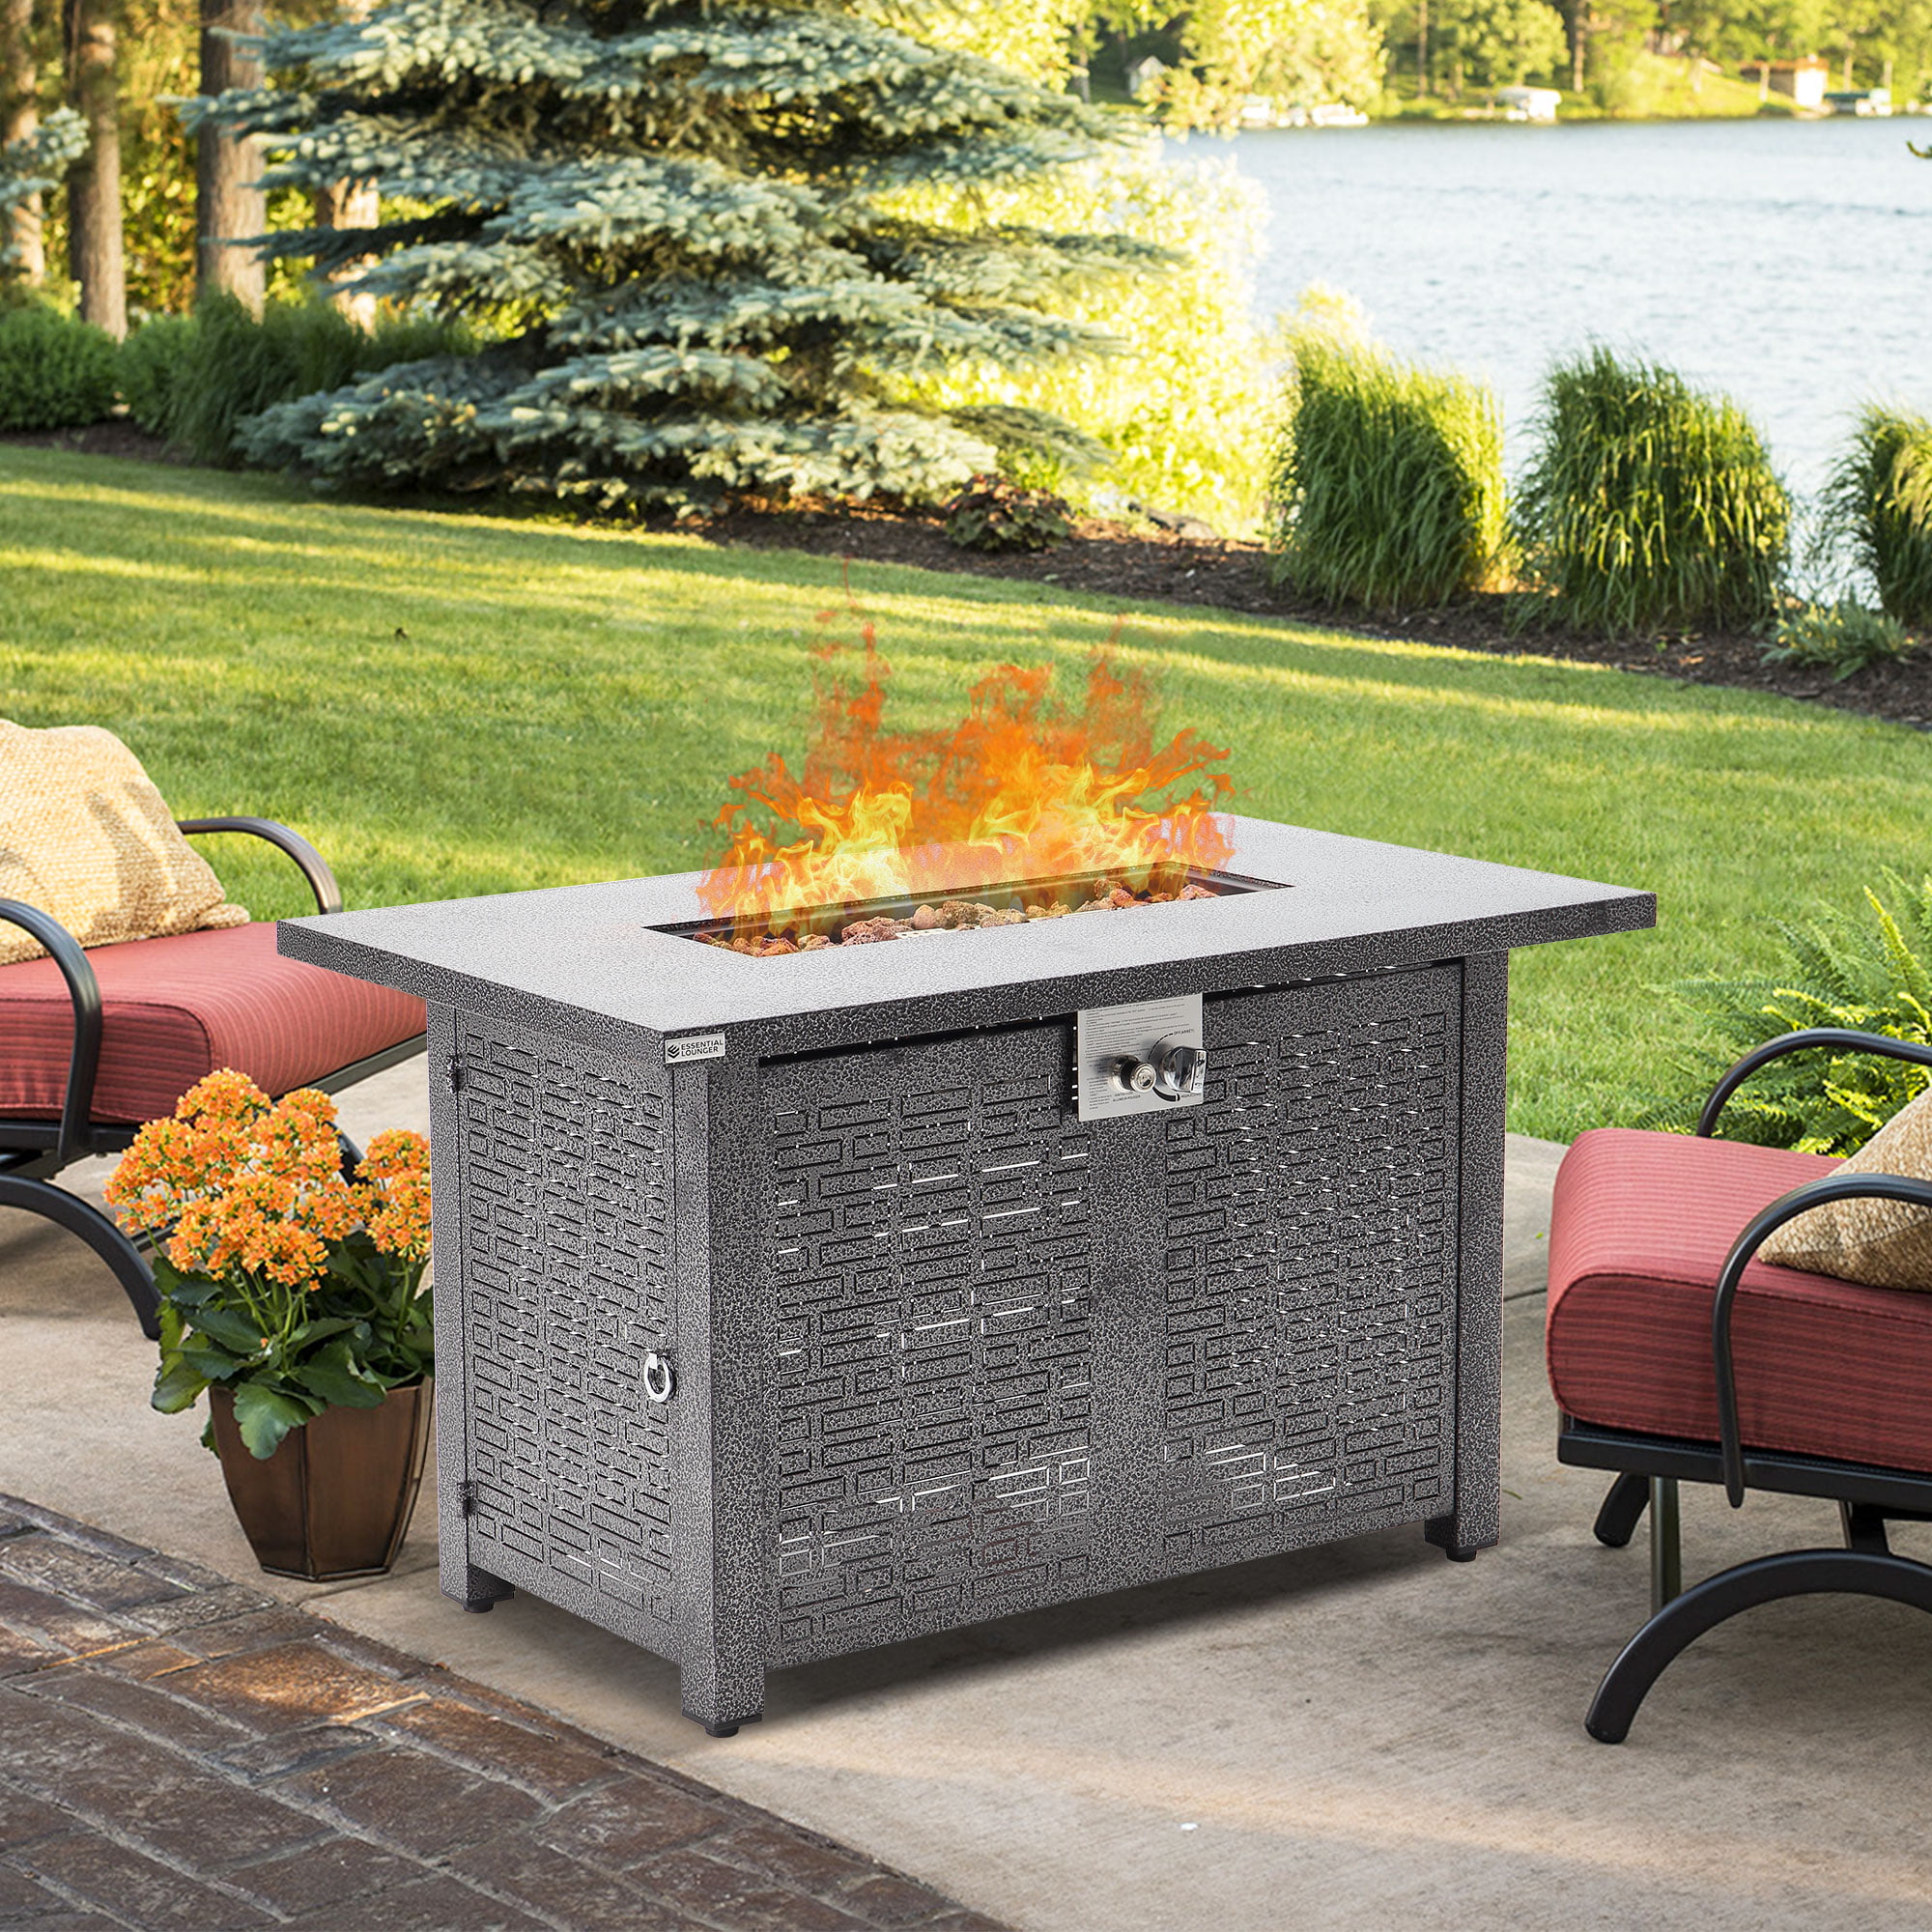 42 Inch 50,000 BTU Auto-Ignition Propane Fire Pit Table with Glass Wind Guard,Outdoor Fire Tables for Garden Patio Backyard Deck Poolside PAMAPIC Outdoor Fire Pits 